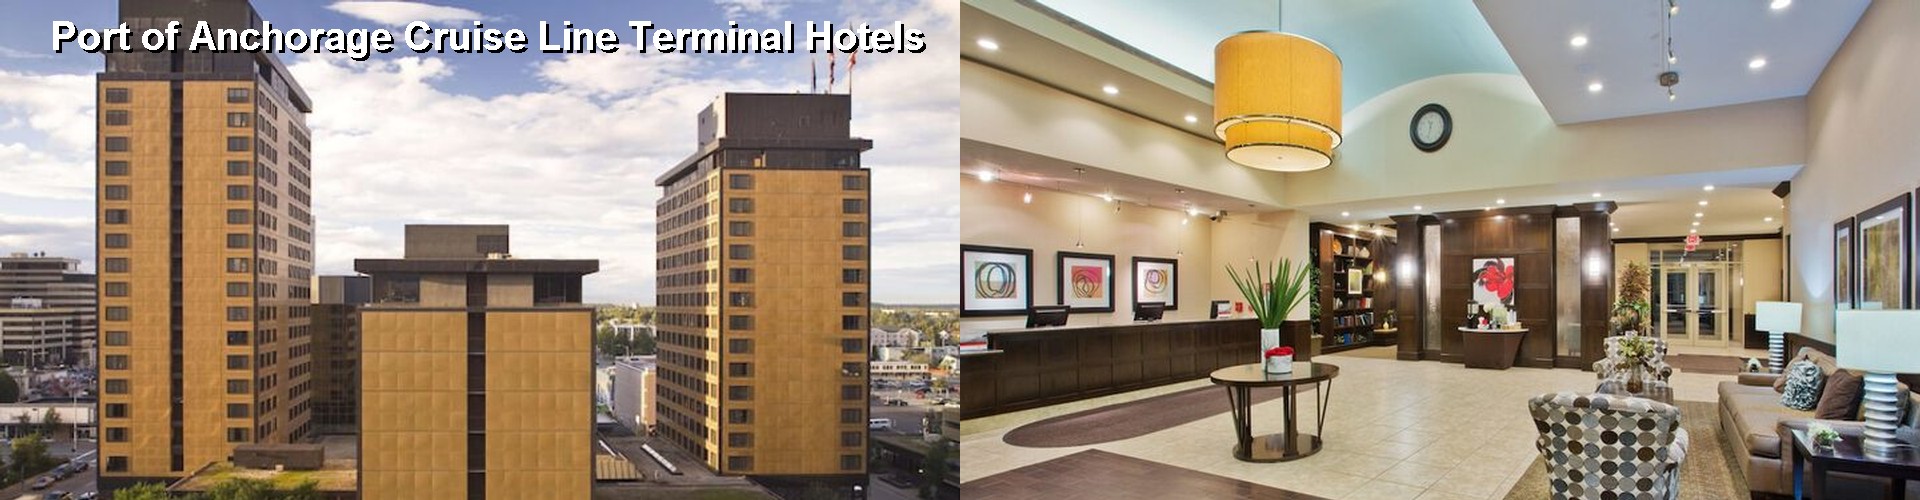 5 Best Hotels near Port of Anchorage Cruise Line Terminal